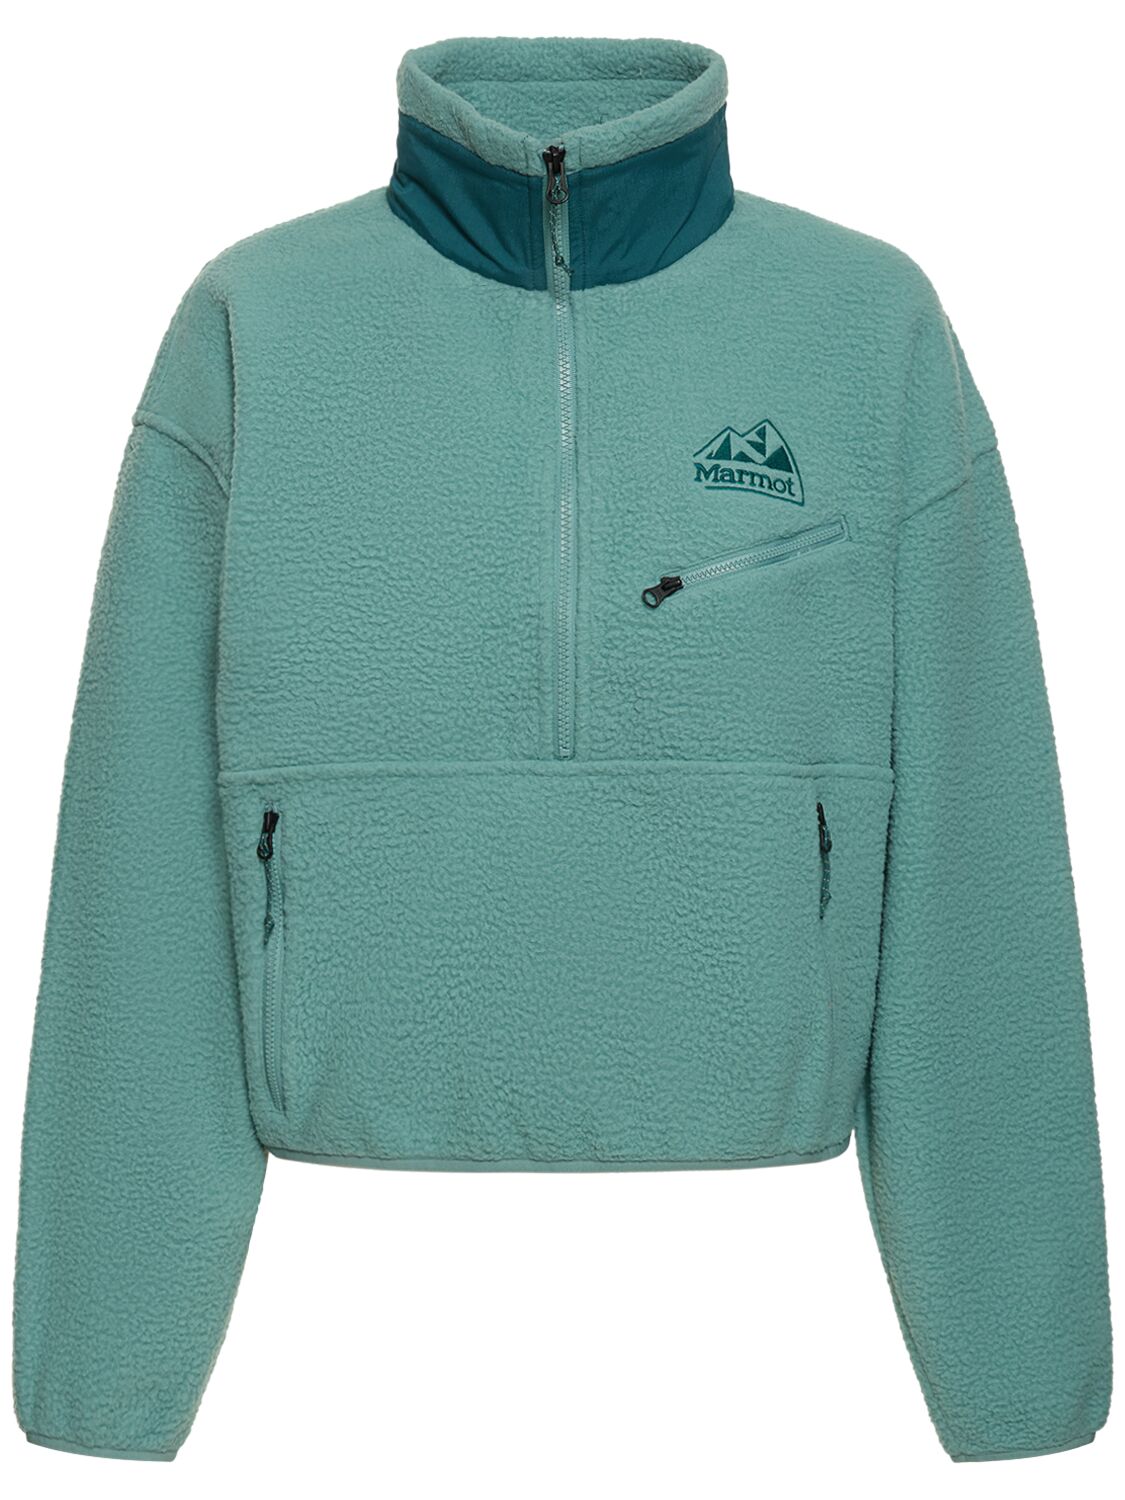 Marmot Recycled Fleece Jumper In Turquoise